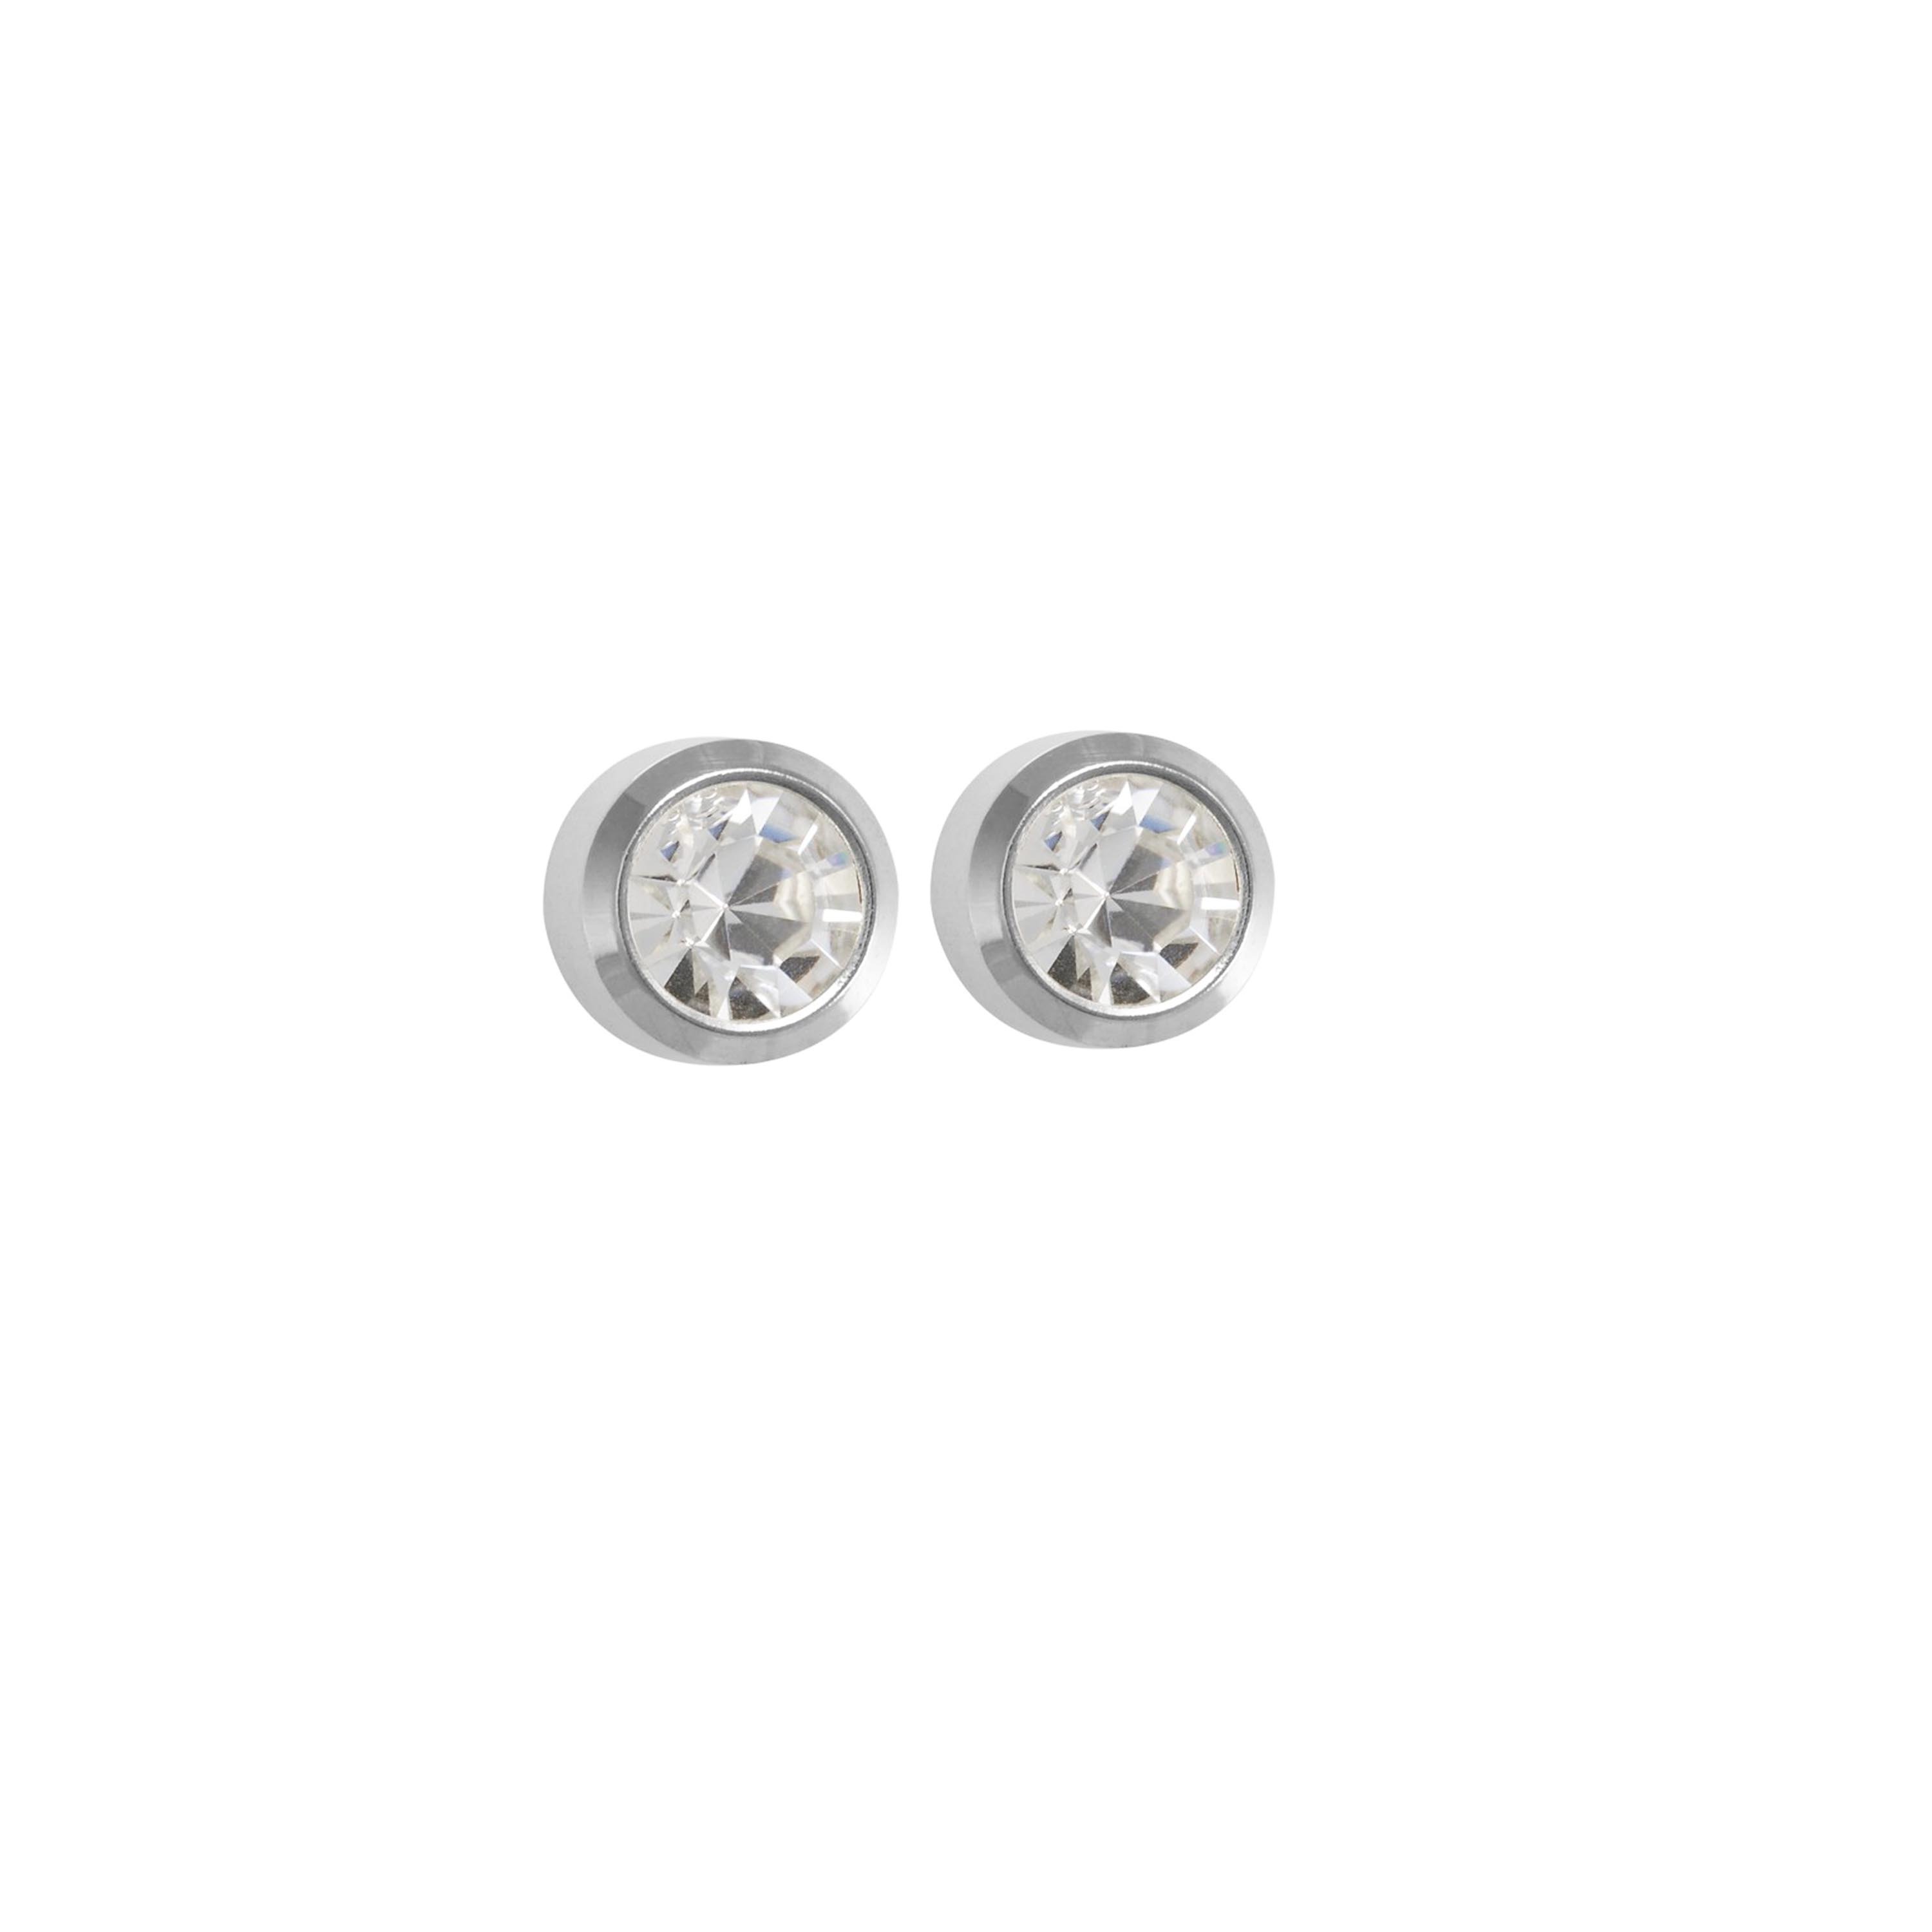 4MM - Bezel - April Crystal | Stainless Steel Piercing Ear Studs come Fashion Earrings | Studex Select